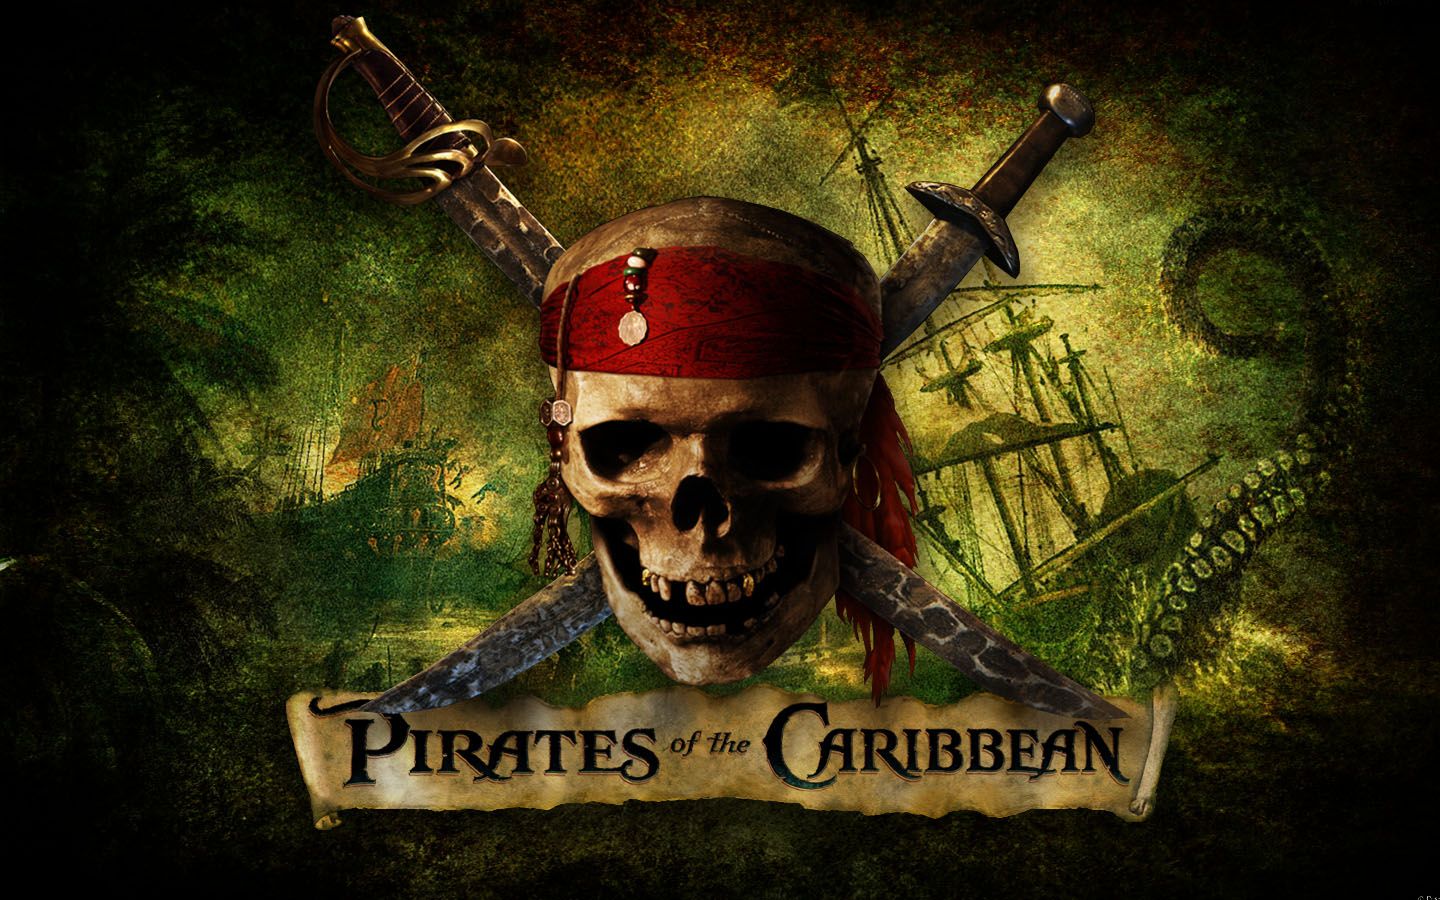 pirates of the caribbean logo posters pirates of the caribbean logo ... -   Pirates of the Caribbean